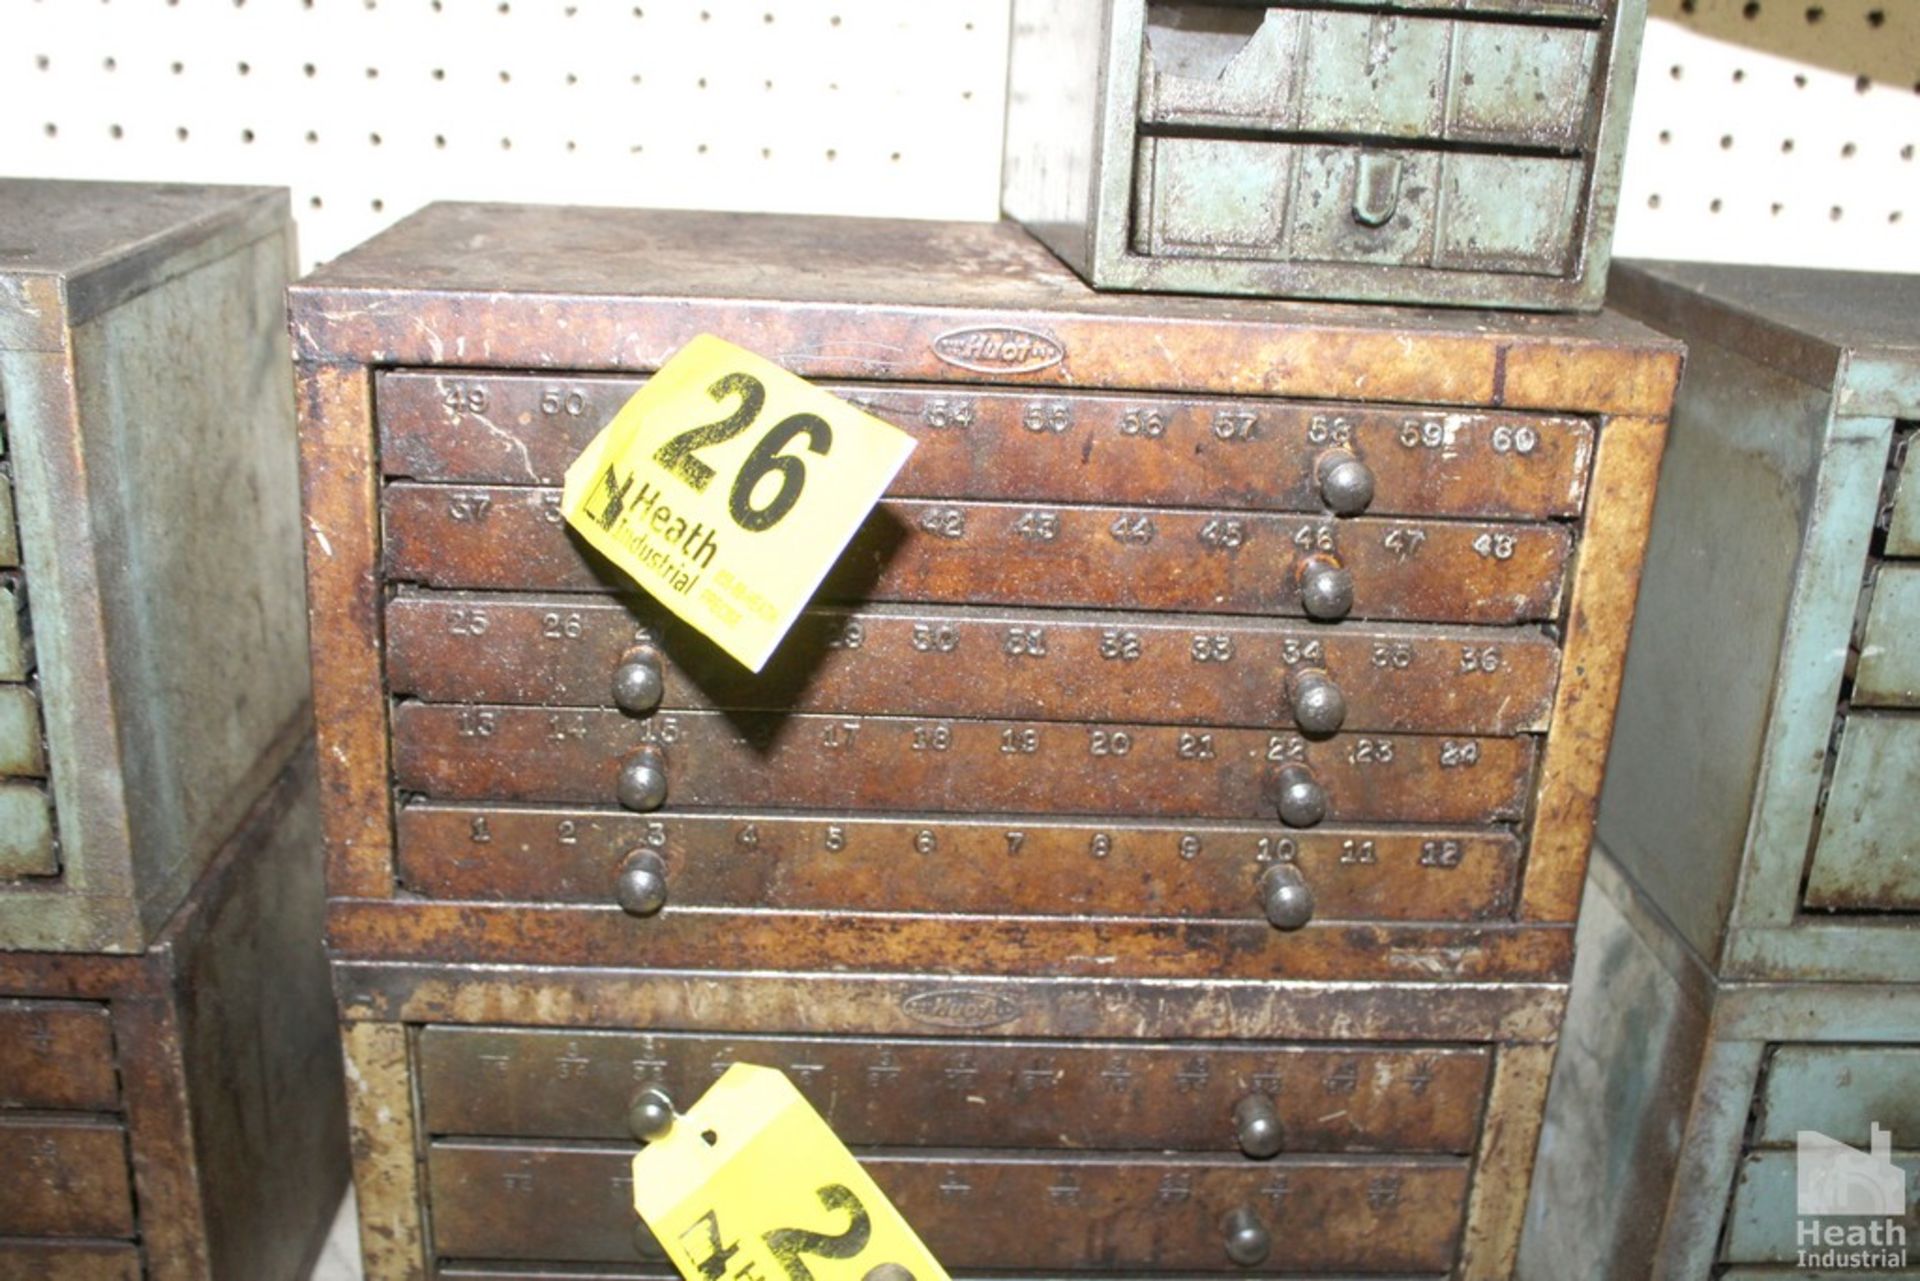 HOUT FIVE DRAWER NUMBER DRILL CABINET 15" X 7-1/2" X 7-1/2 WITH CONTENTS